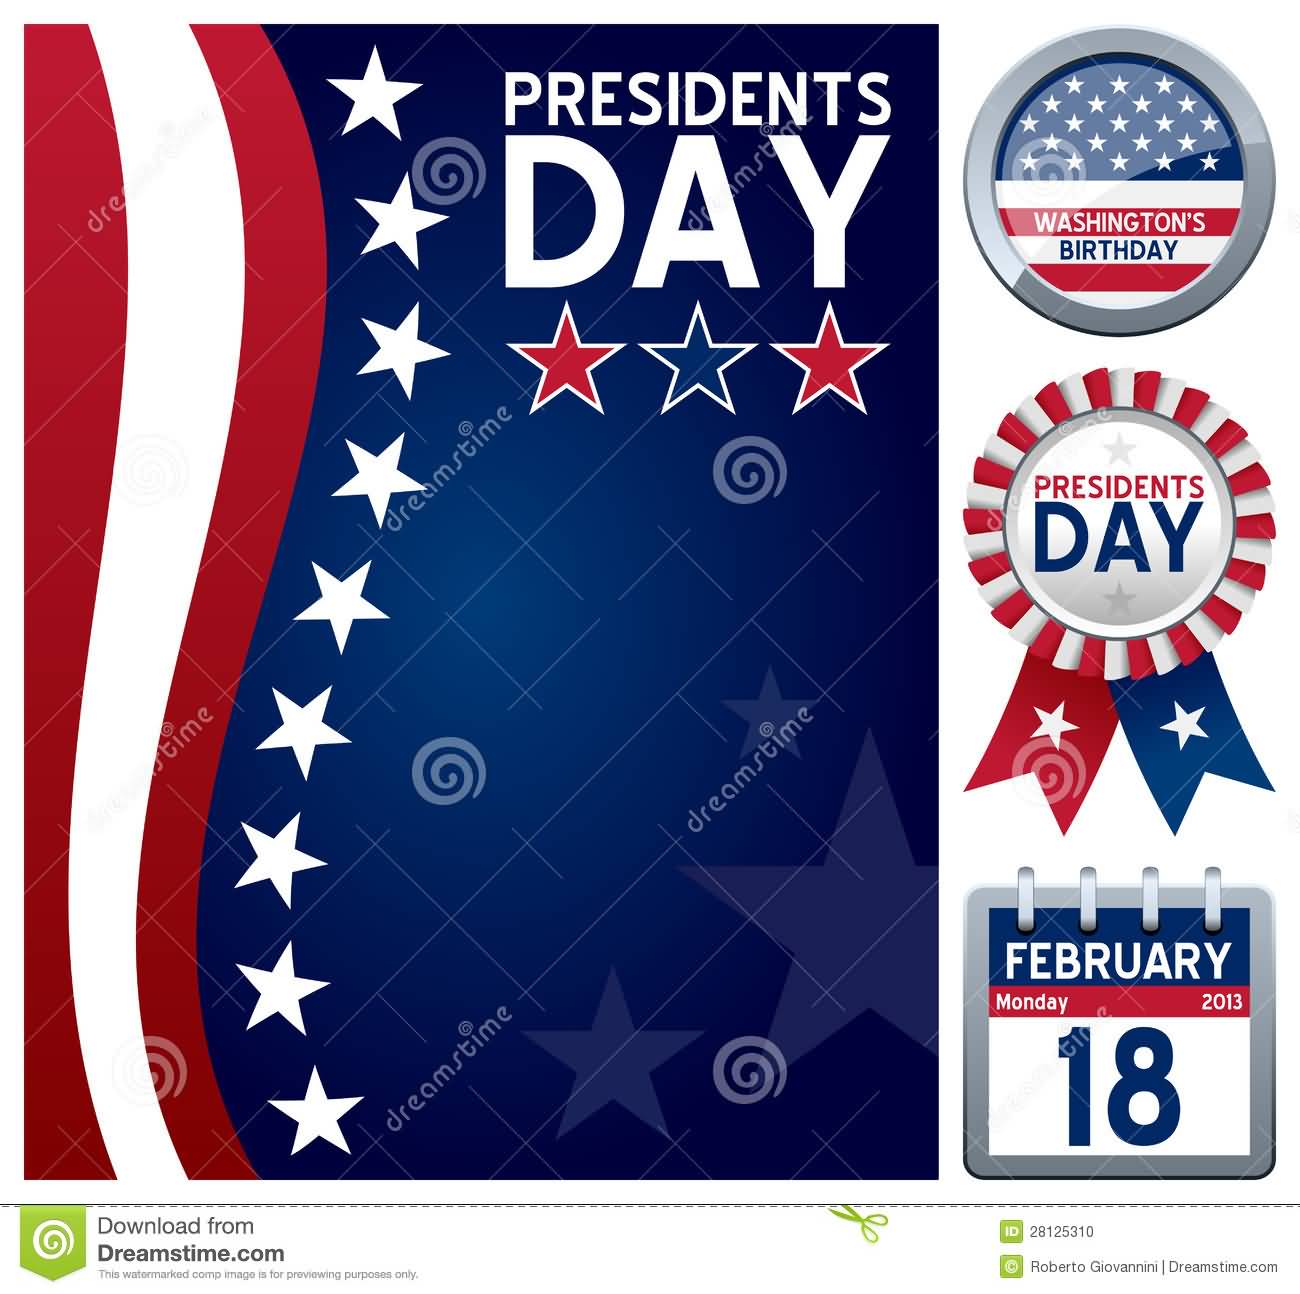 Presidents Day 2017 Greeting Card